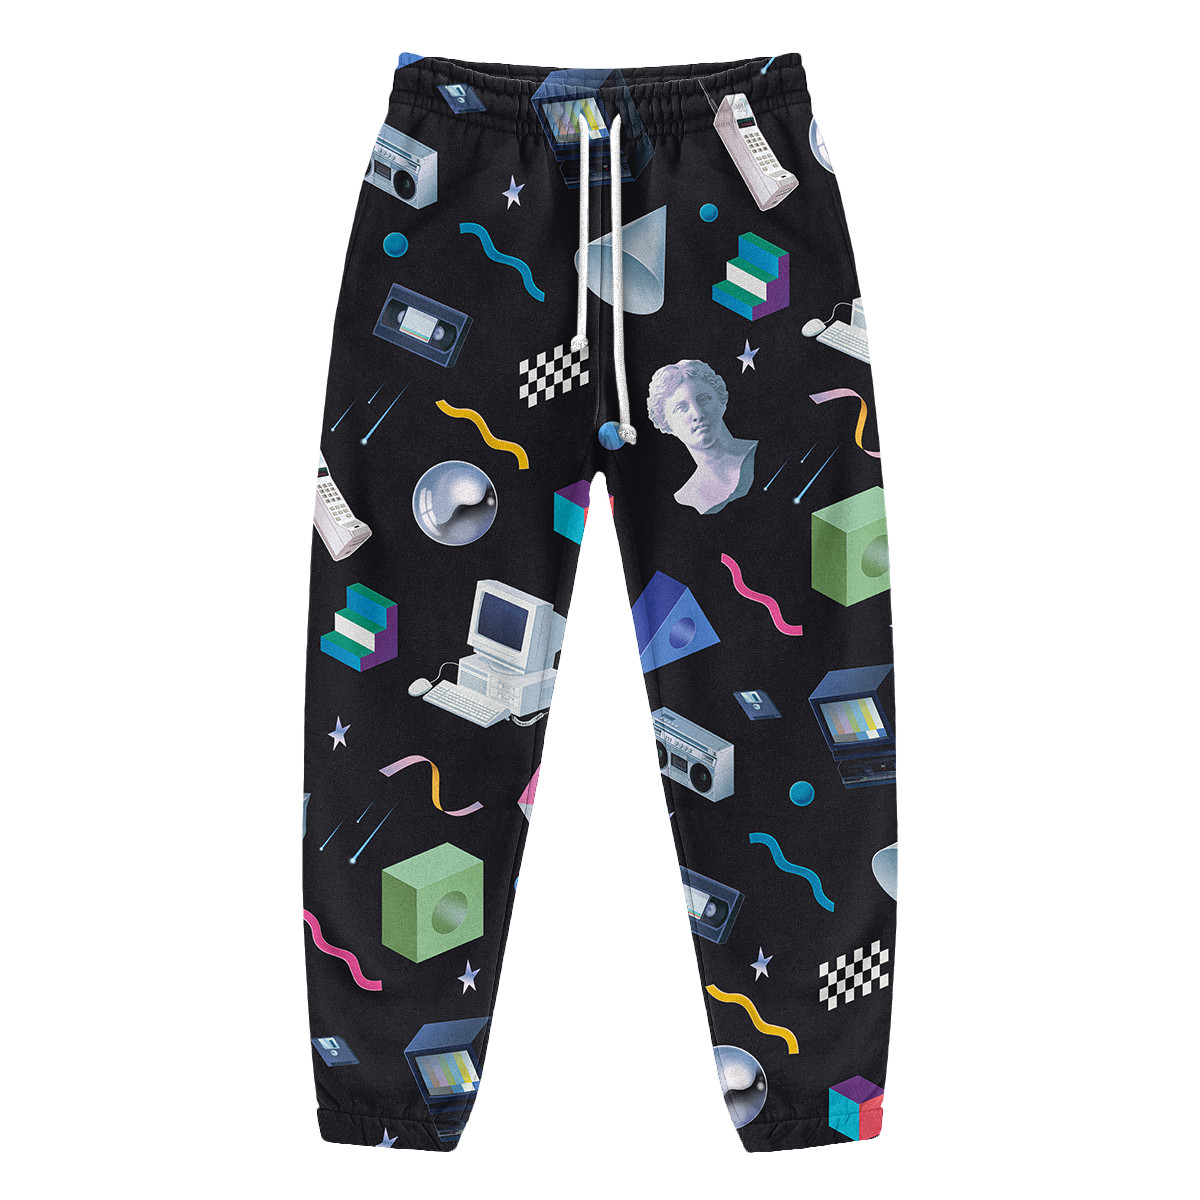 Shapes & Forms Joggers